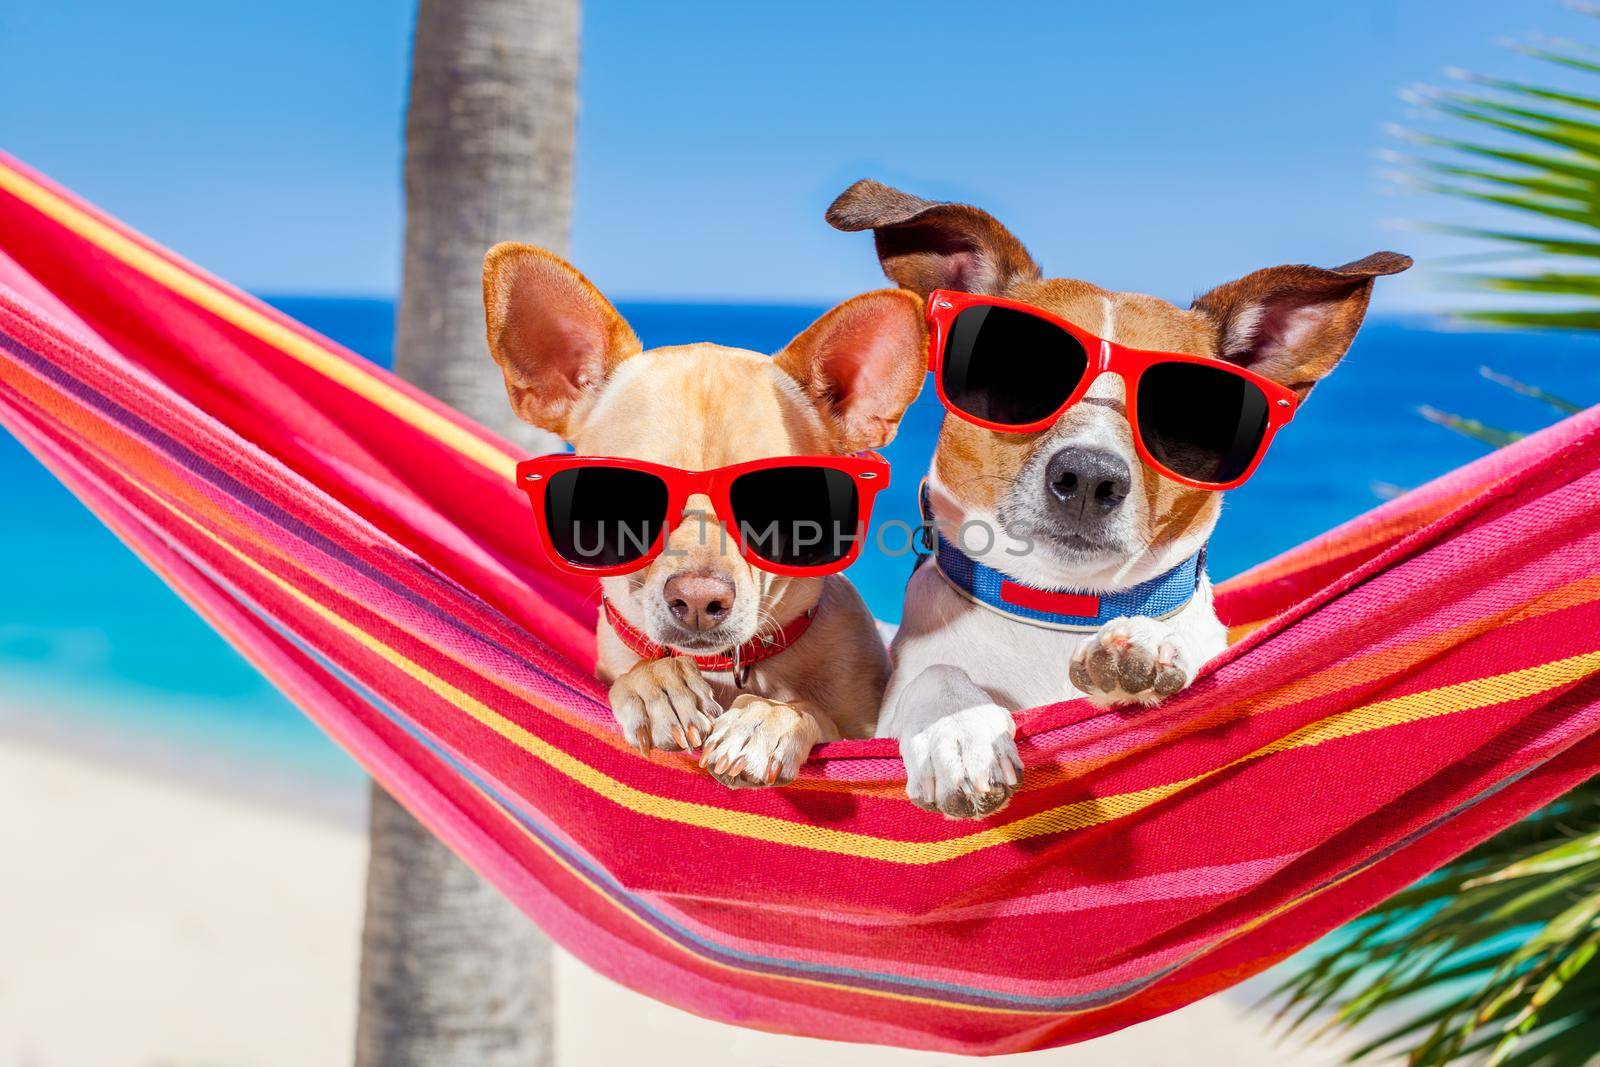 couple of two  dogs relaxing on a fancy red  hammock with sunglasses in summer vacation holidays at the beach under the palm tree